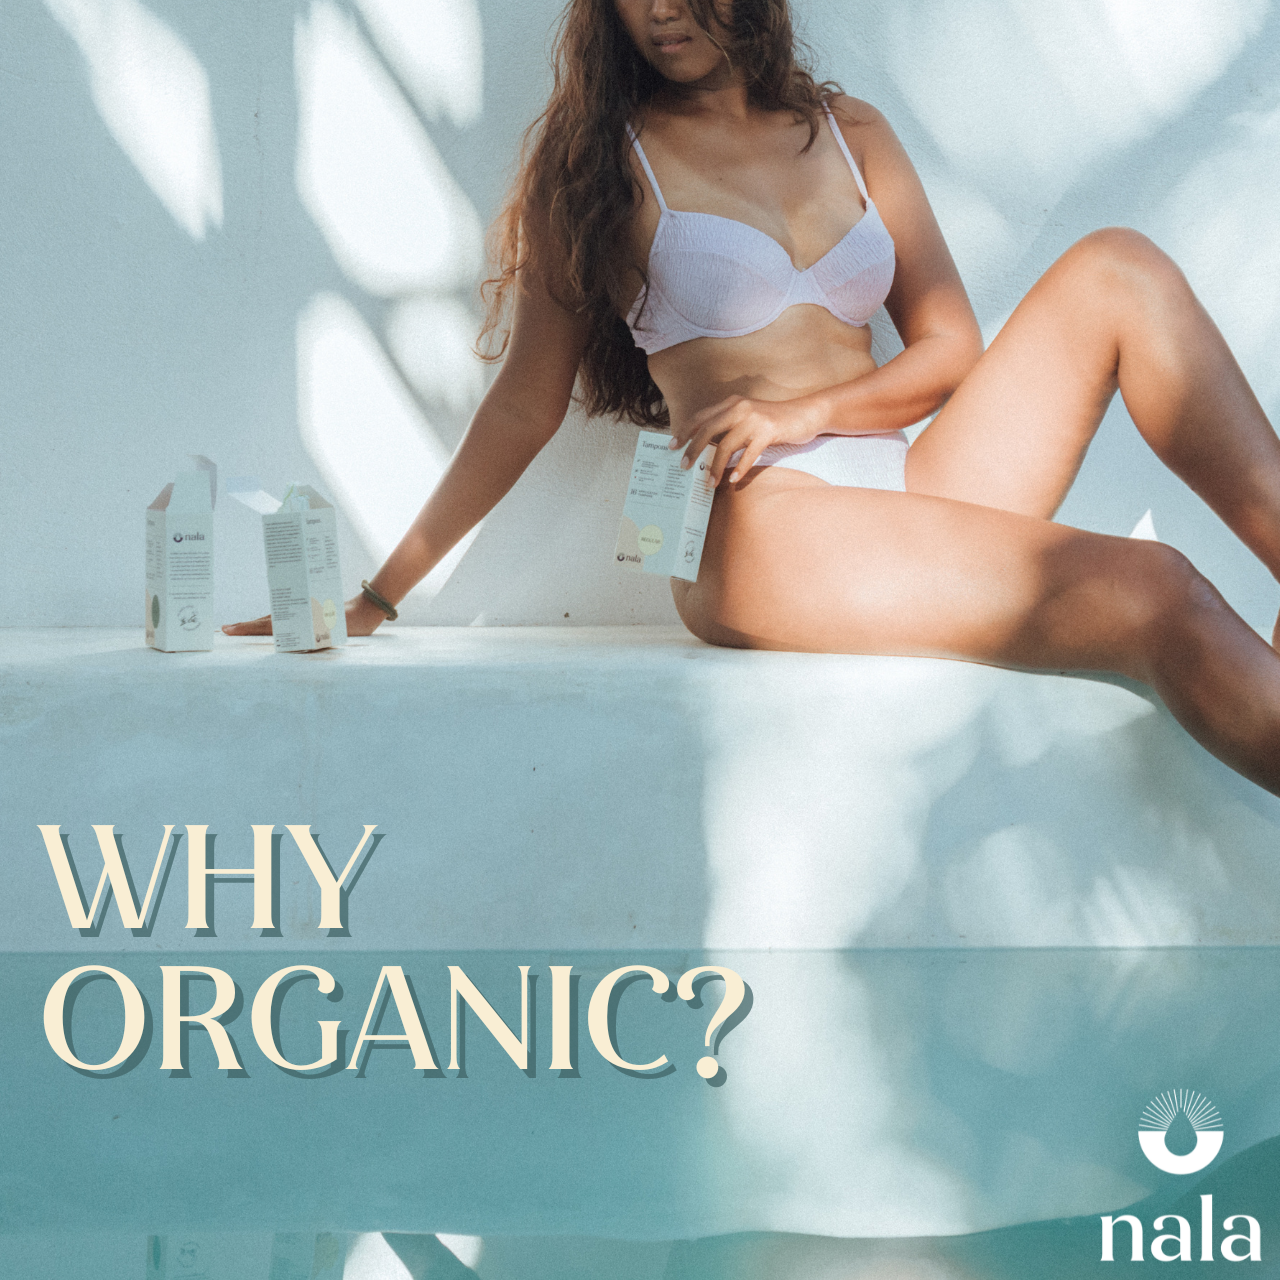 Why Choose Organic Products?